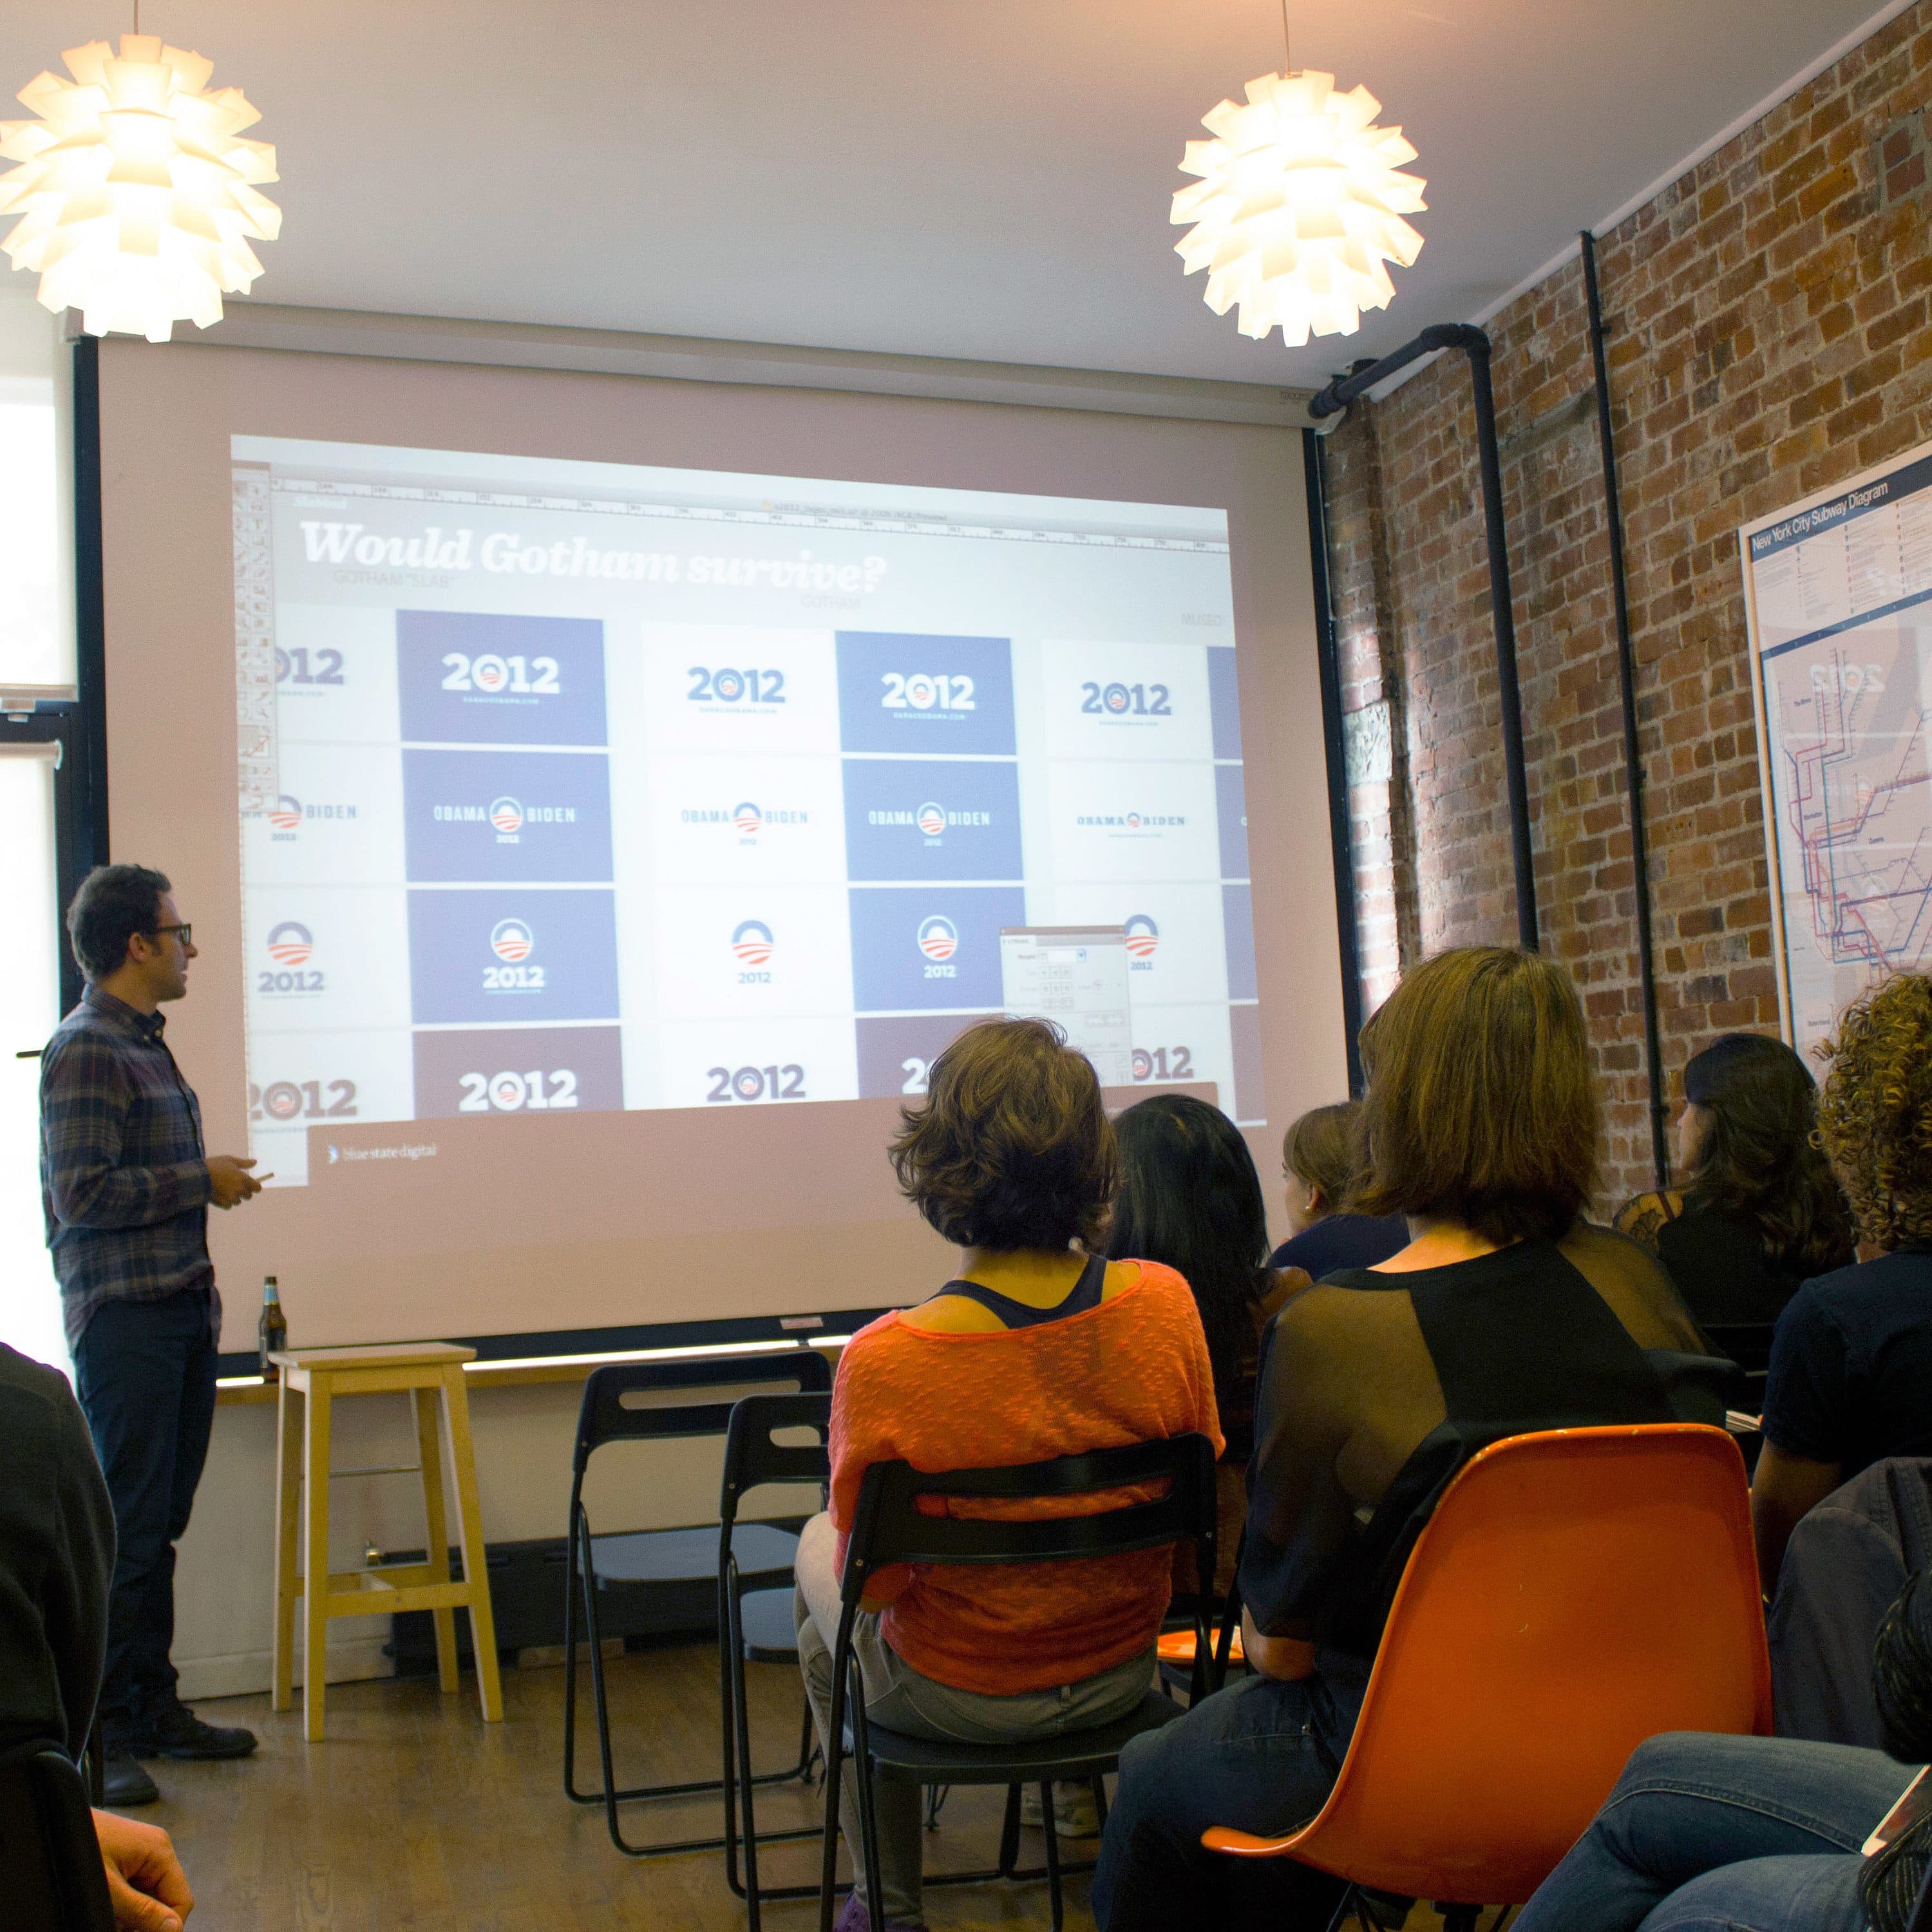 A man presents information displayed on a projected screen to a group of people seated in a room. The room has exposed brick walls, modern pendant lights, and a map on the wall. The audience is attentively watching the presentation.